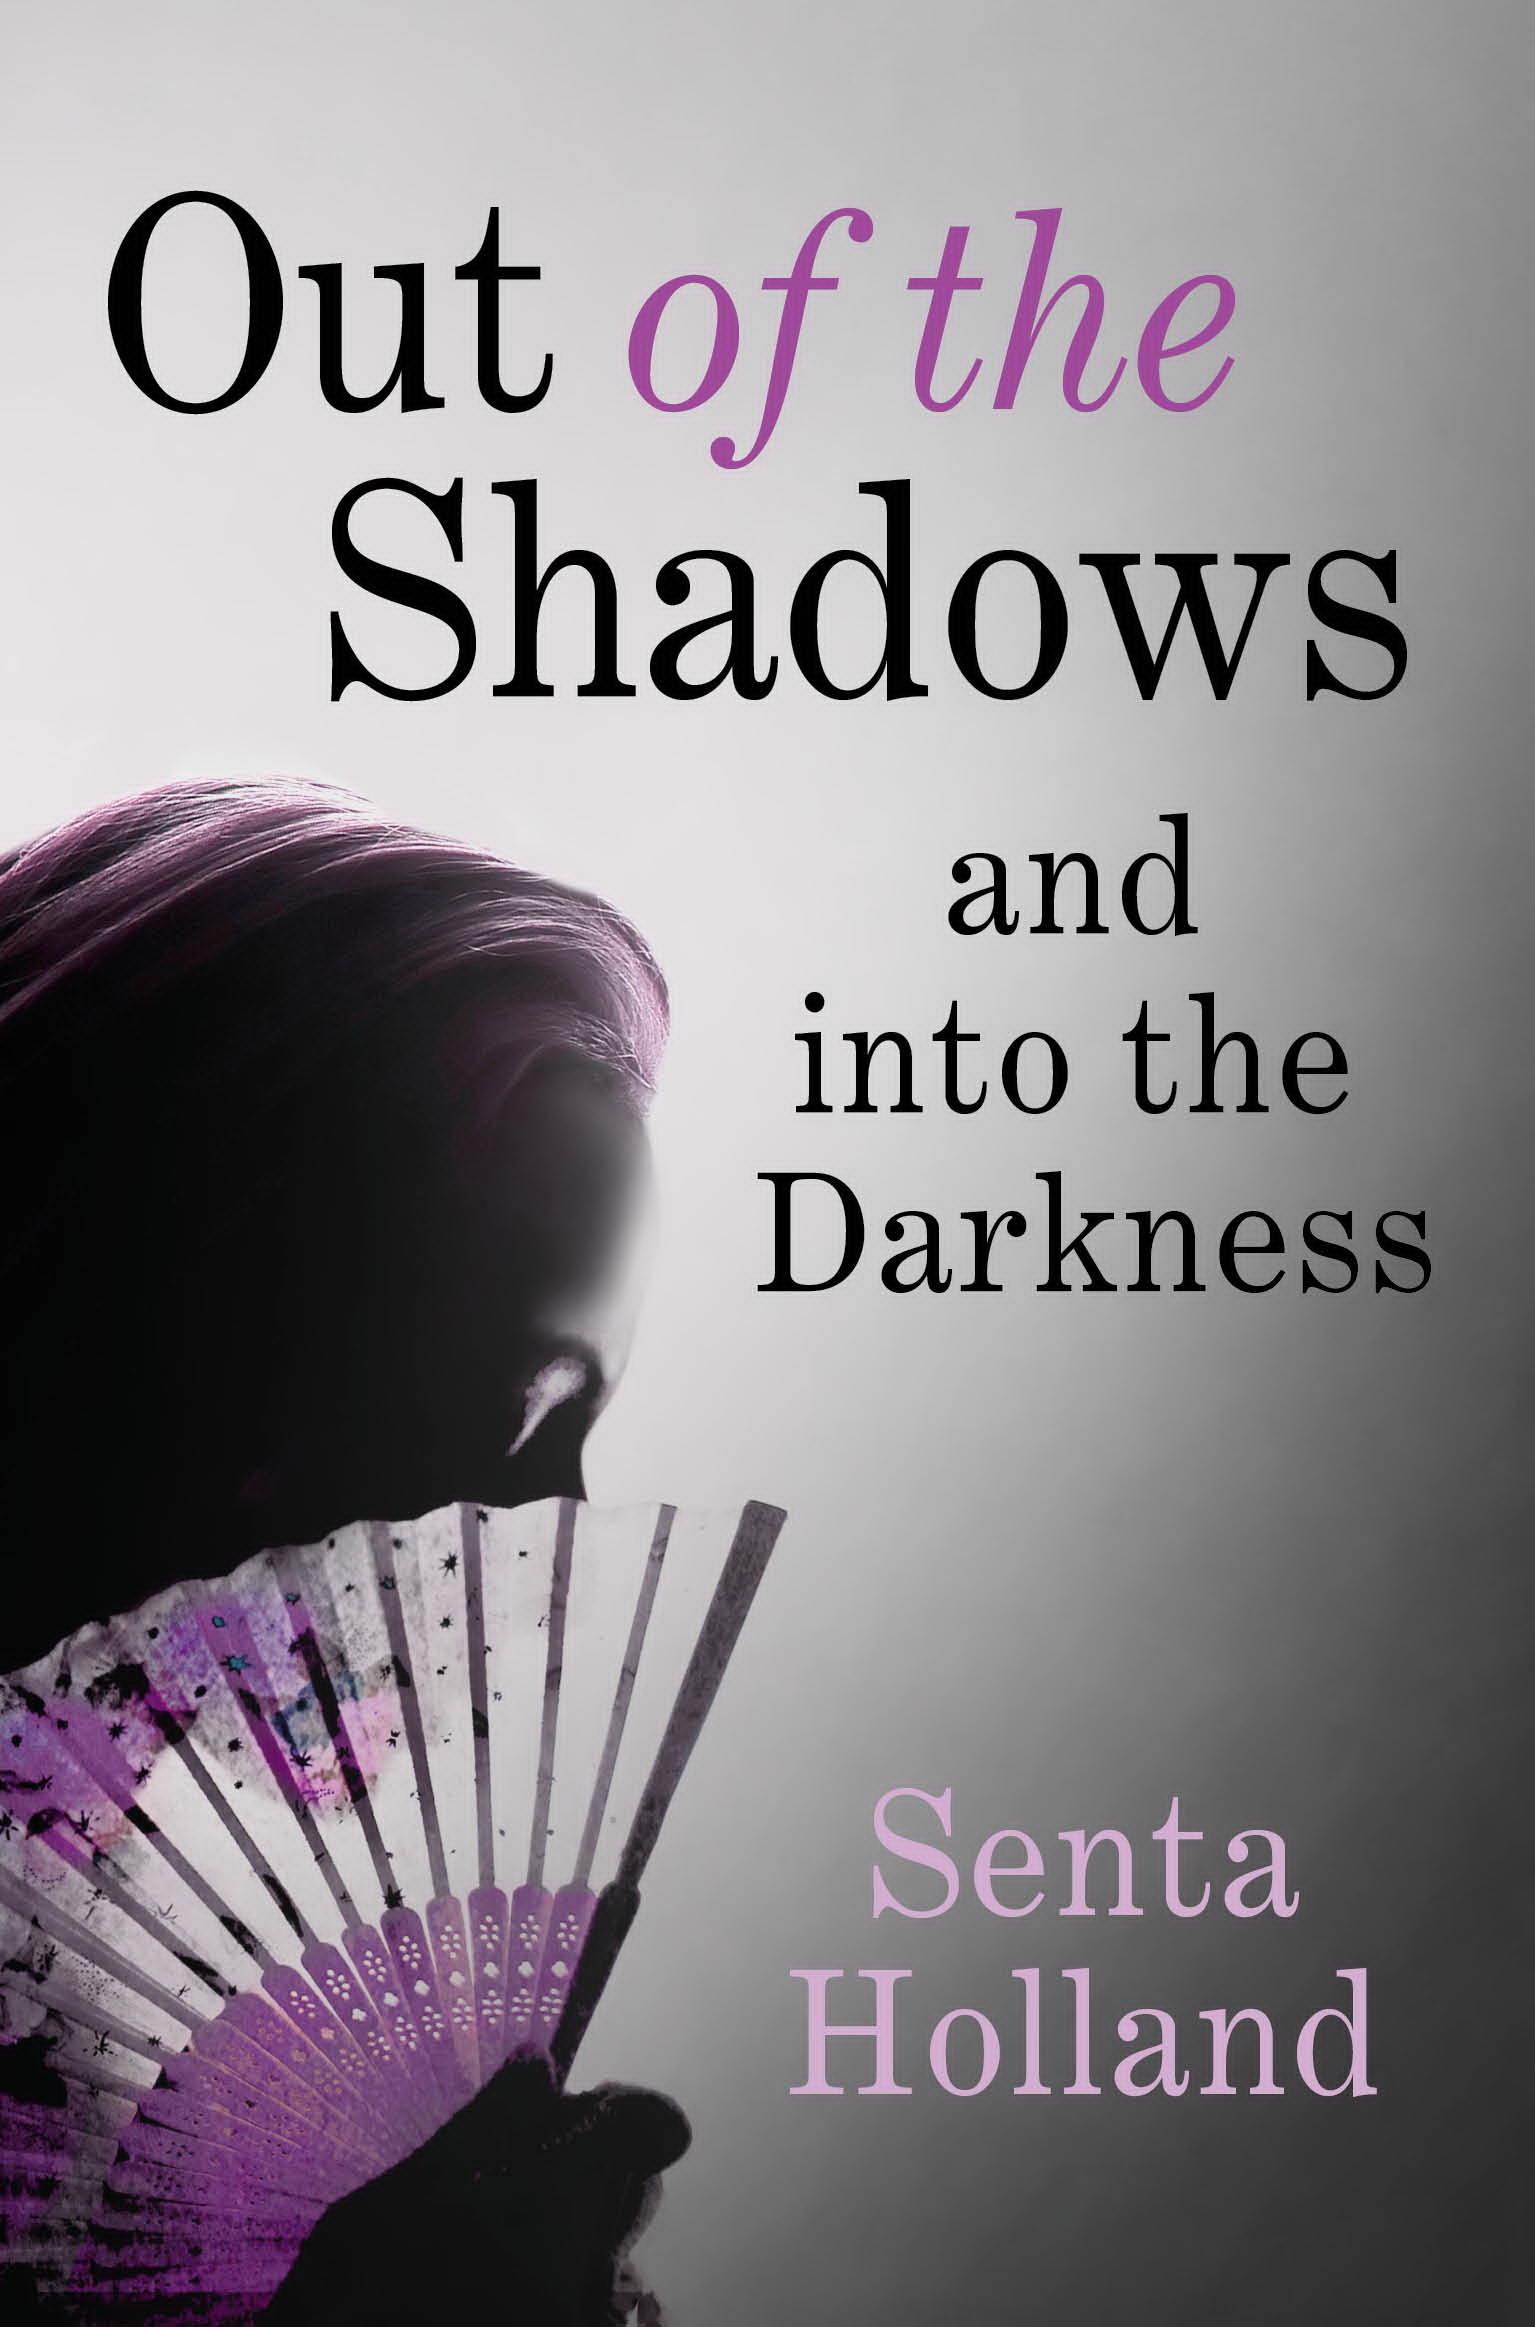 out-of-the-shadows-and-into-the-darkness-senta-holland-harpercollins.jpg